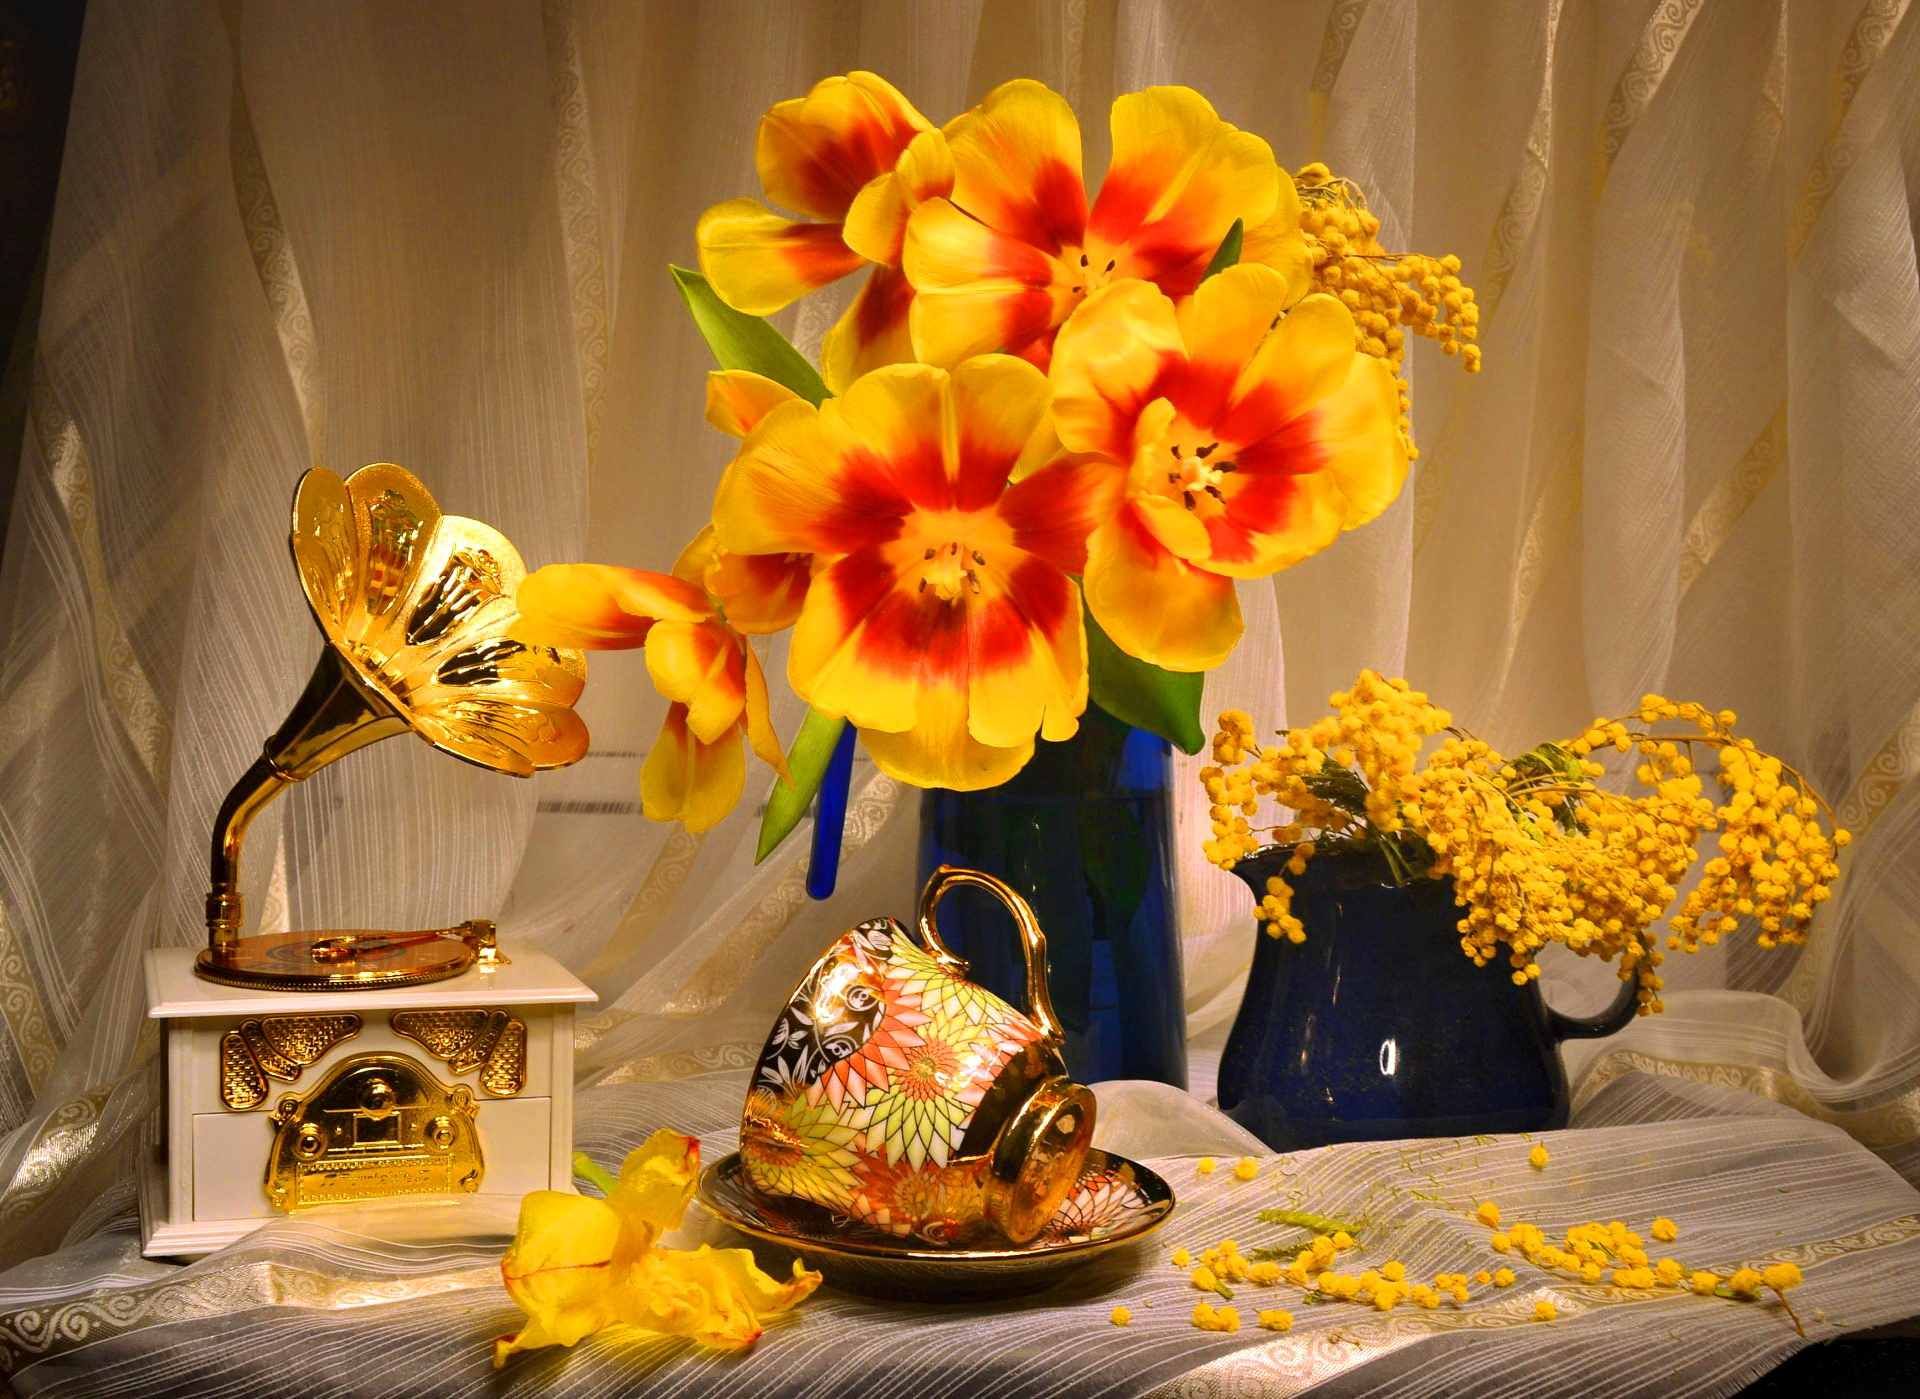 photography, still life, cup, flower, gramophone, tulip, vase, yellow flower 1080p